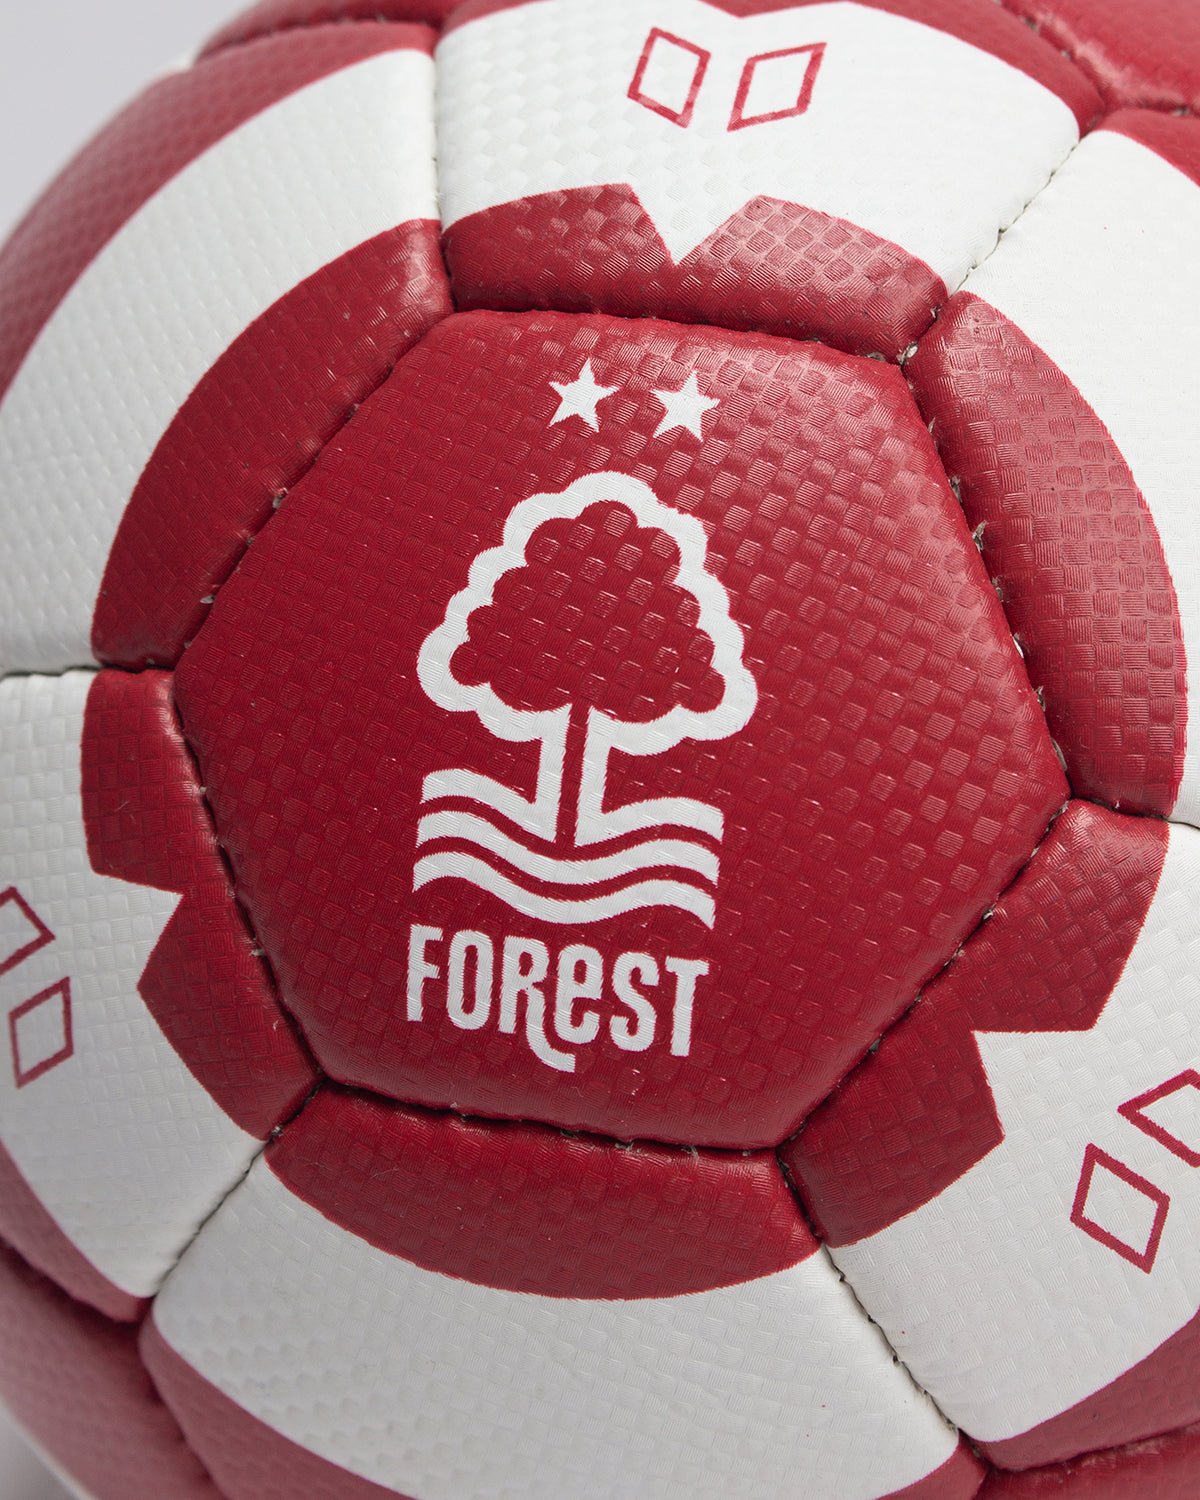 NFFC Red Hoop Football - Size 1 - Nottingham Forest FC